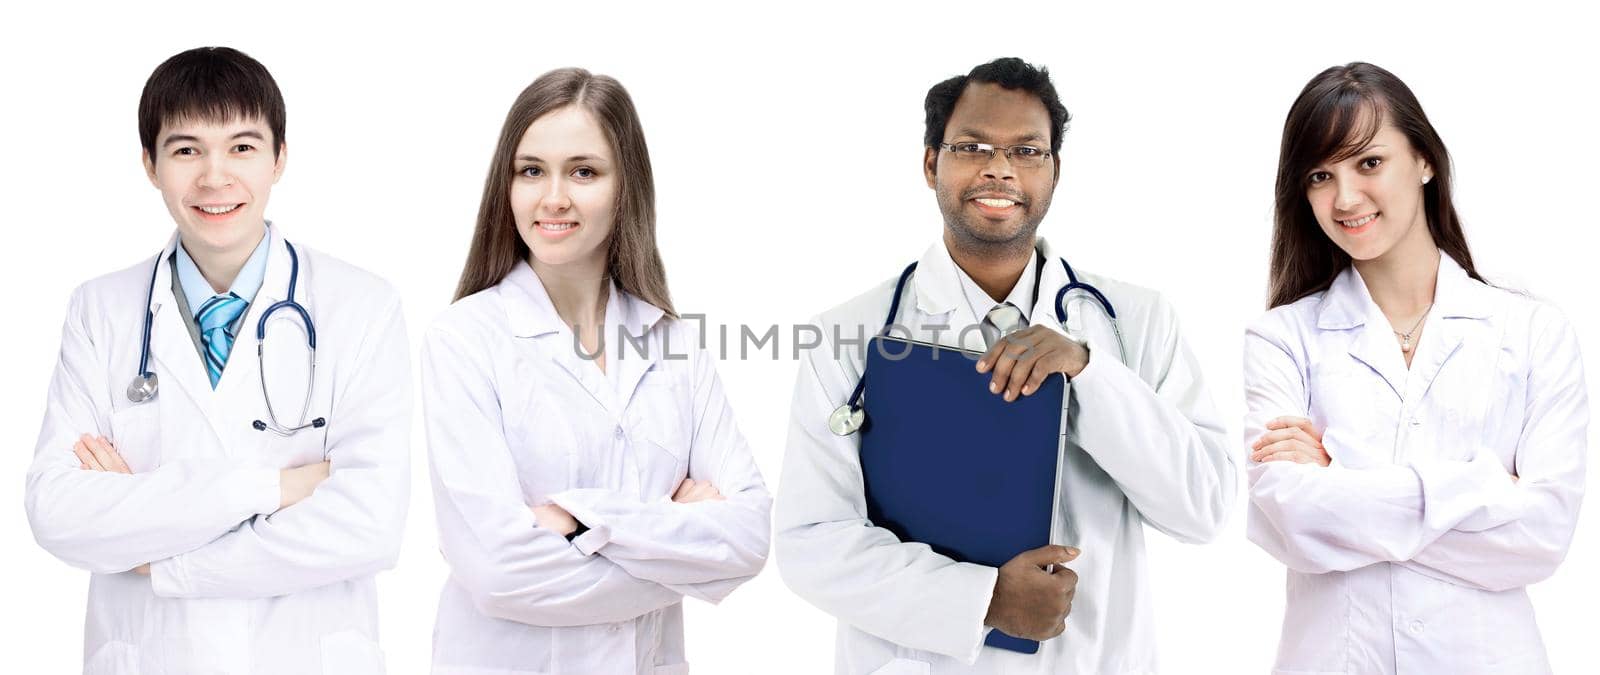 Portrait of group of smiling hospital colleagues standing together, isolated on white